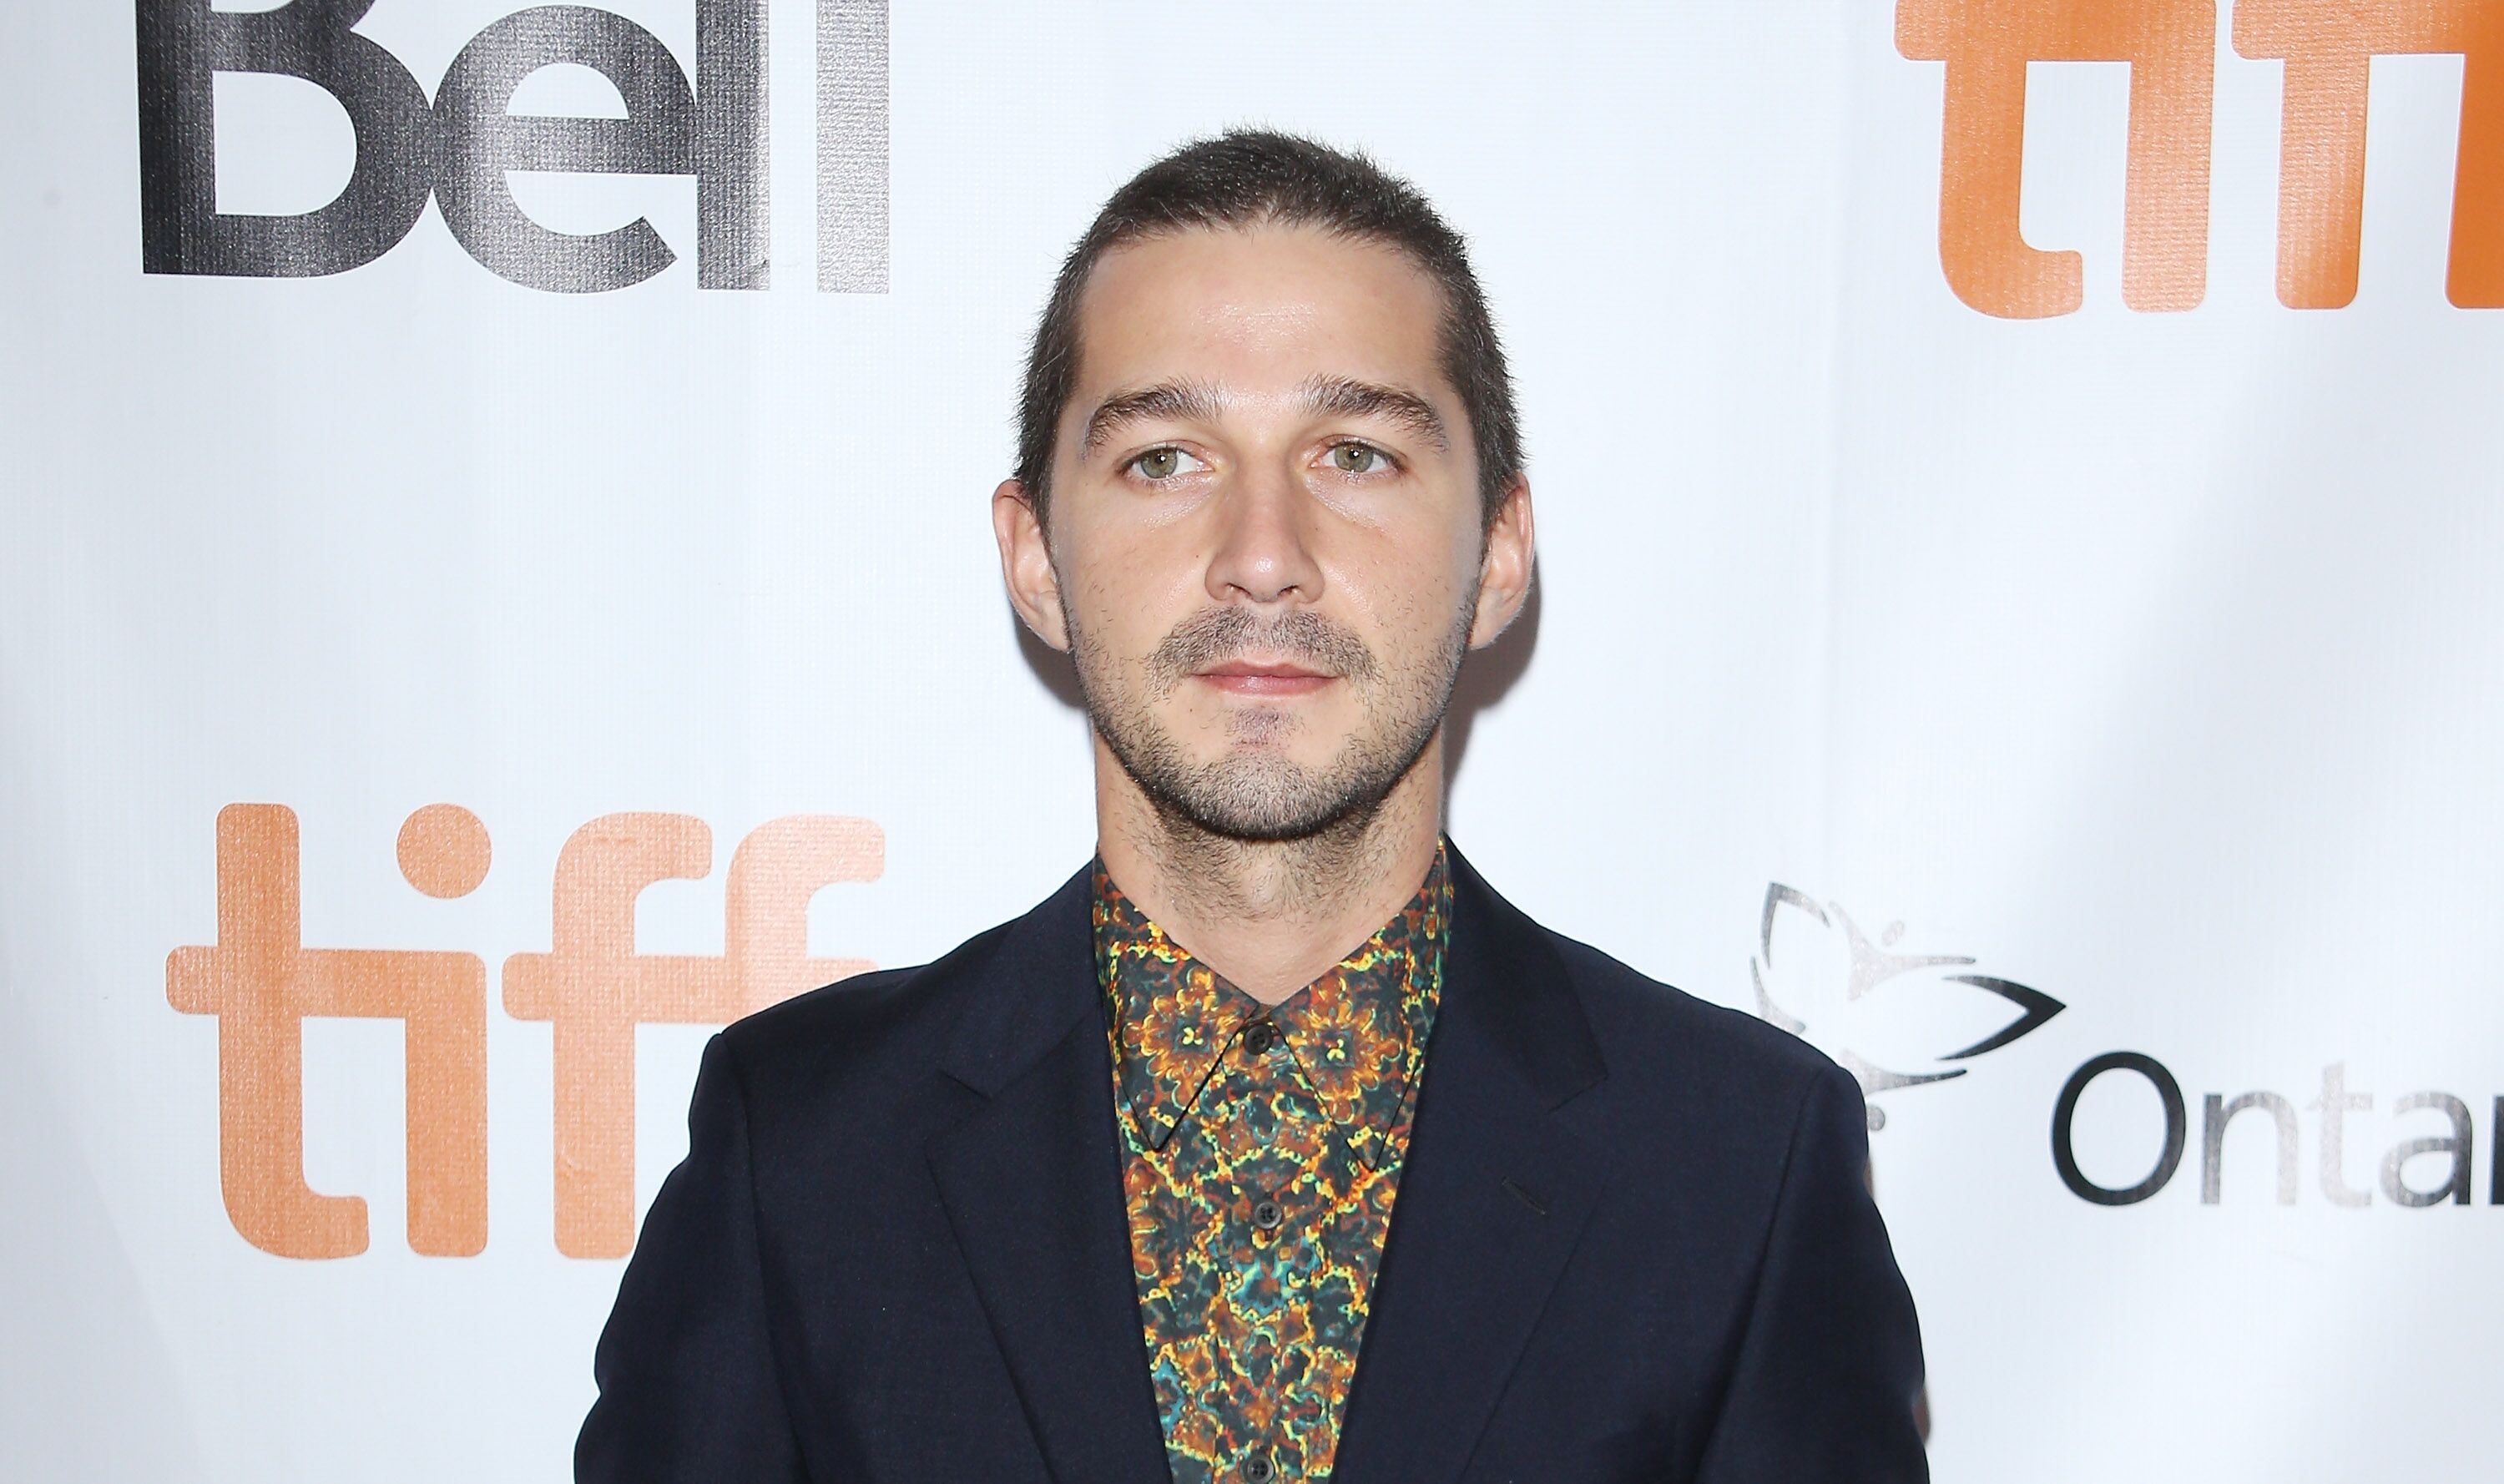 Shia LaBeouf attends the 'Borg/McEnroe' premiere. | Source: Getty Images